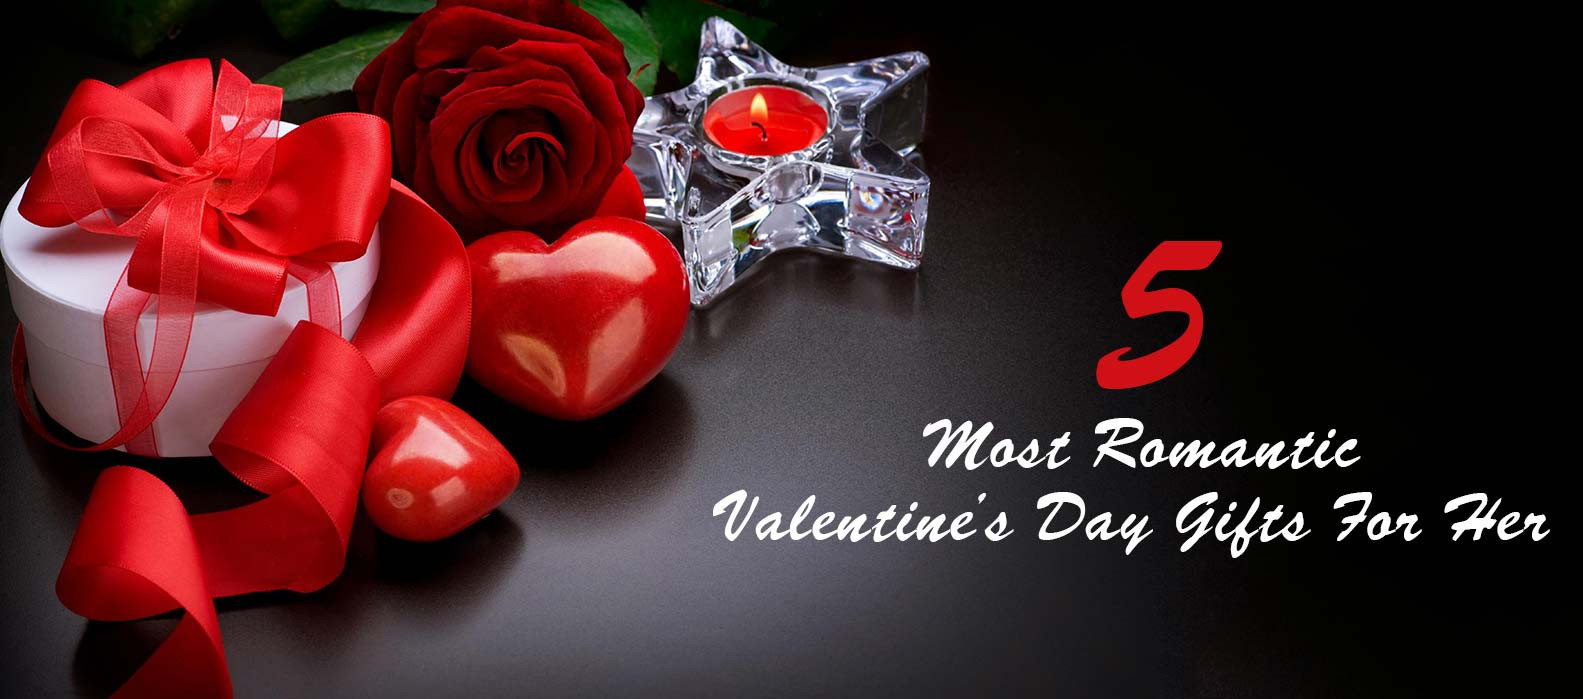 Romantic Valentines Day Gifts
 5 Most Romantic Valentine s Day Gifts For Her Tajonline